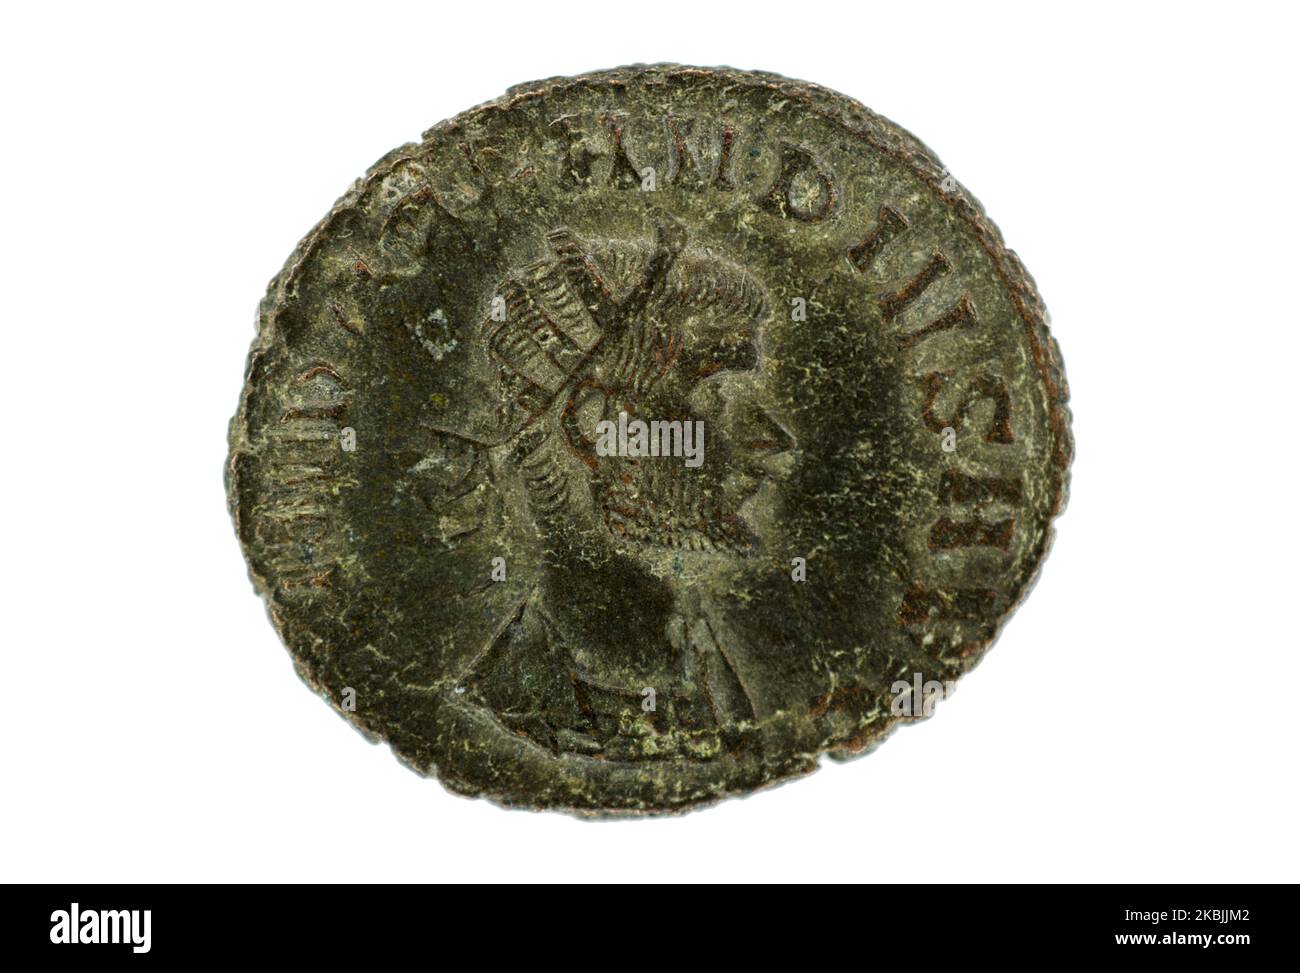 The obverse of a Roman coin, an antoninianus showing Claudius II (268-270 AD). Stock Photo